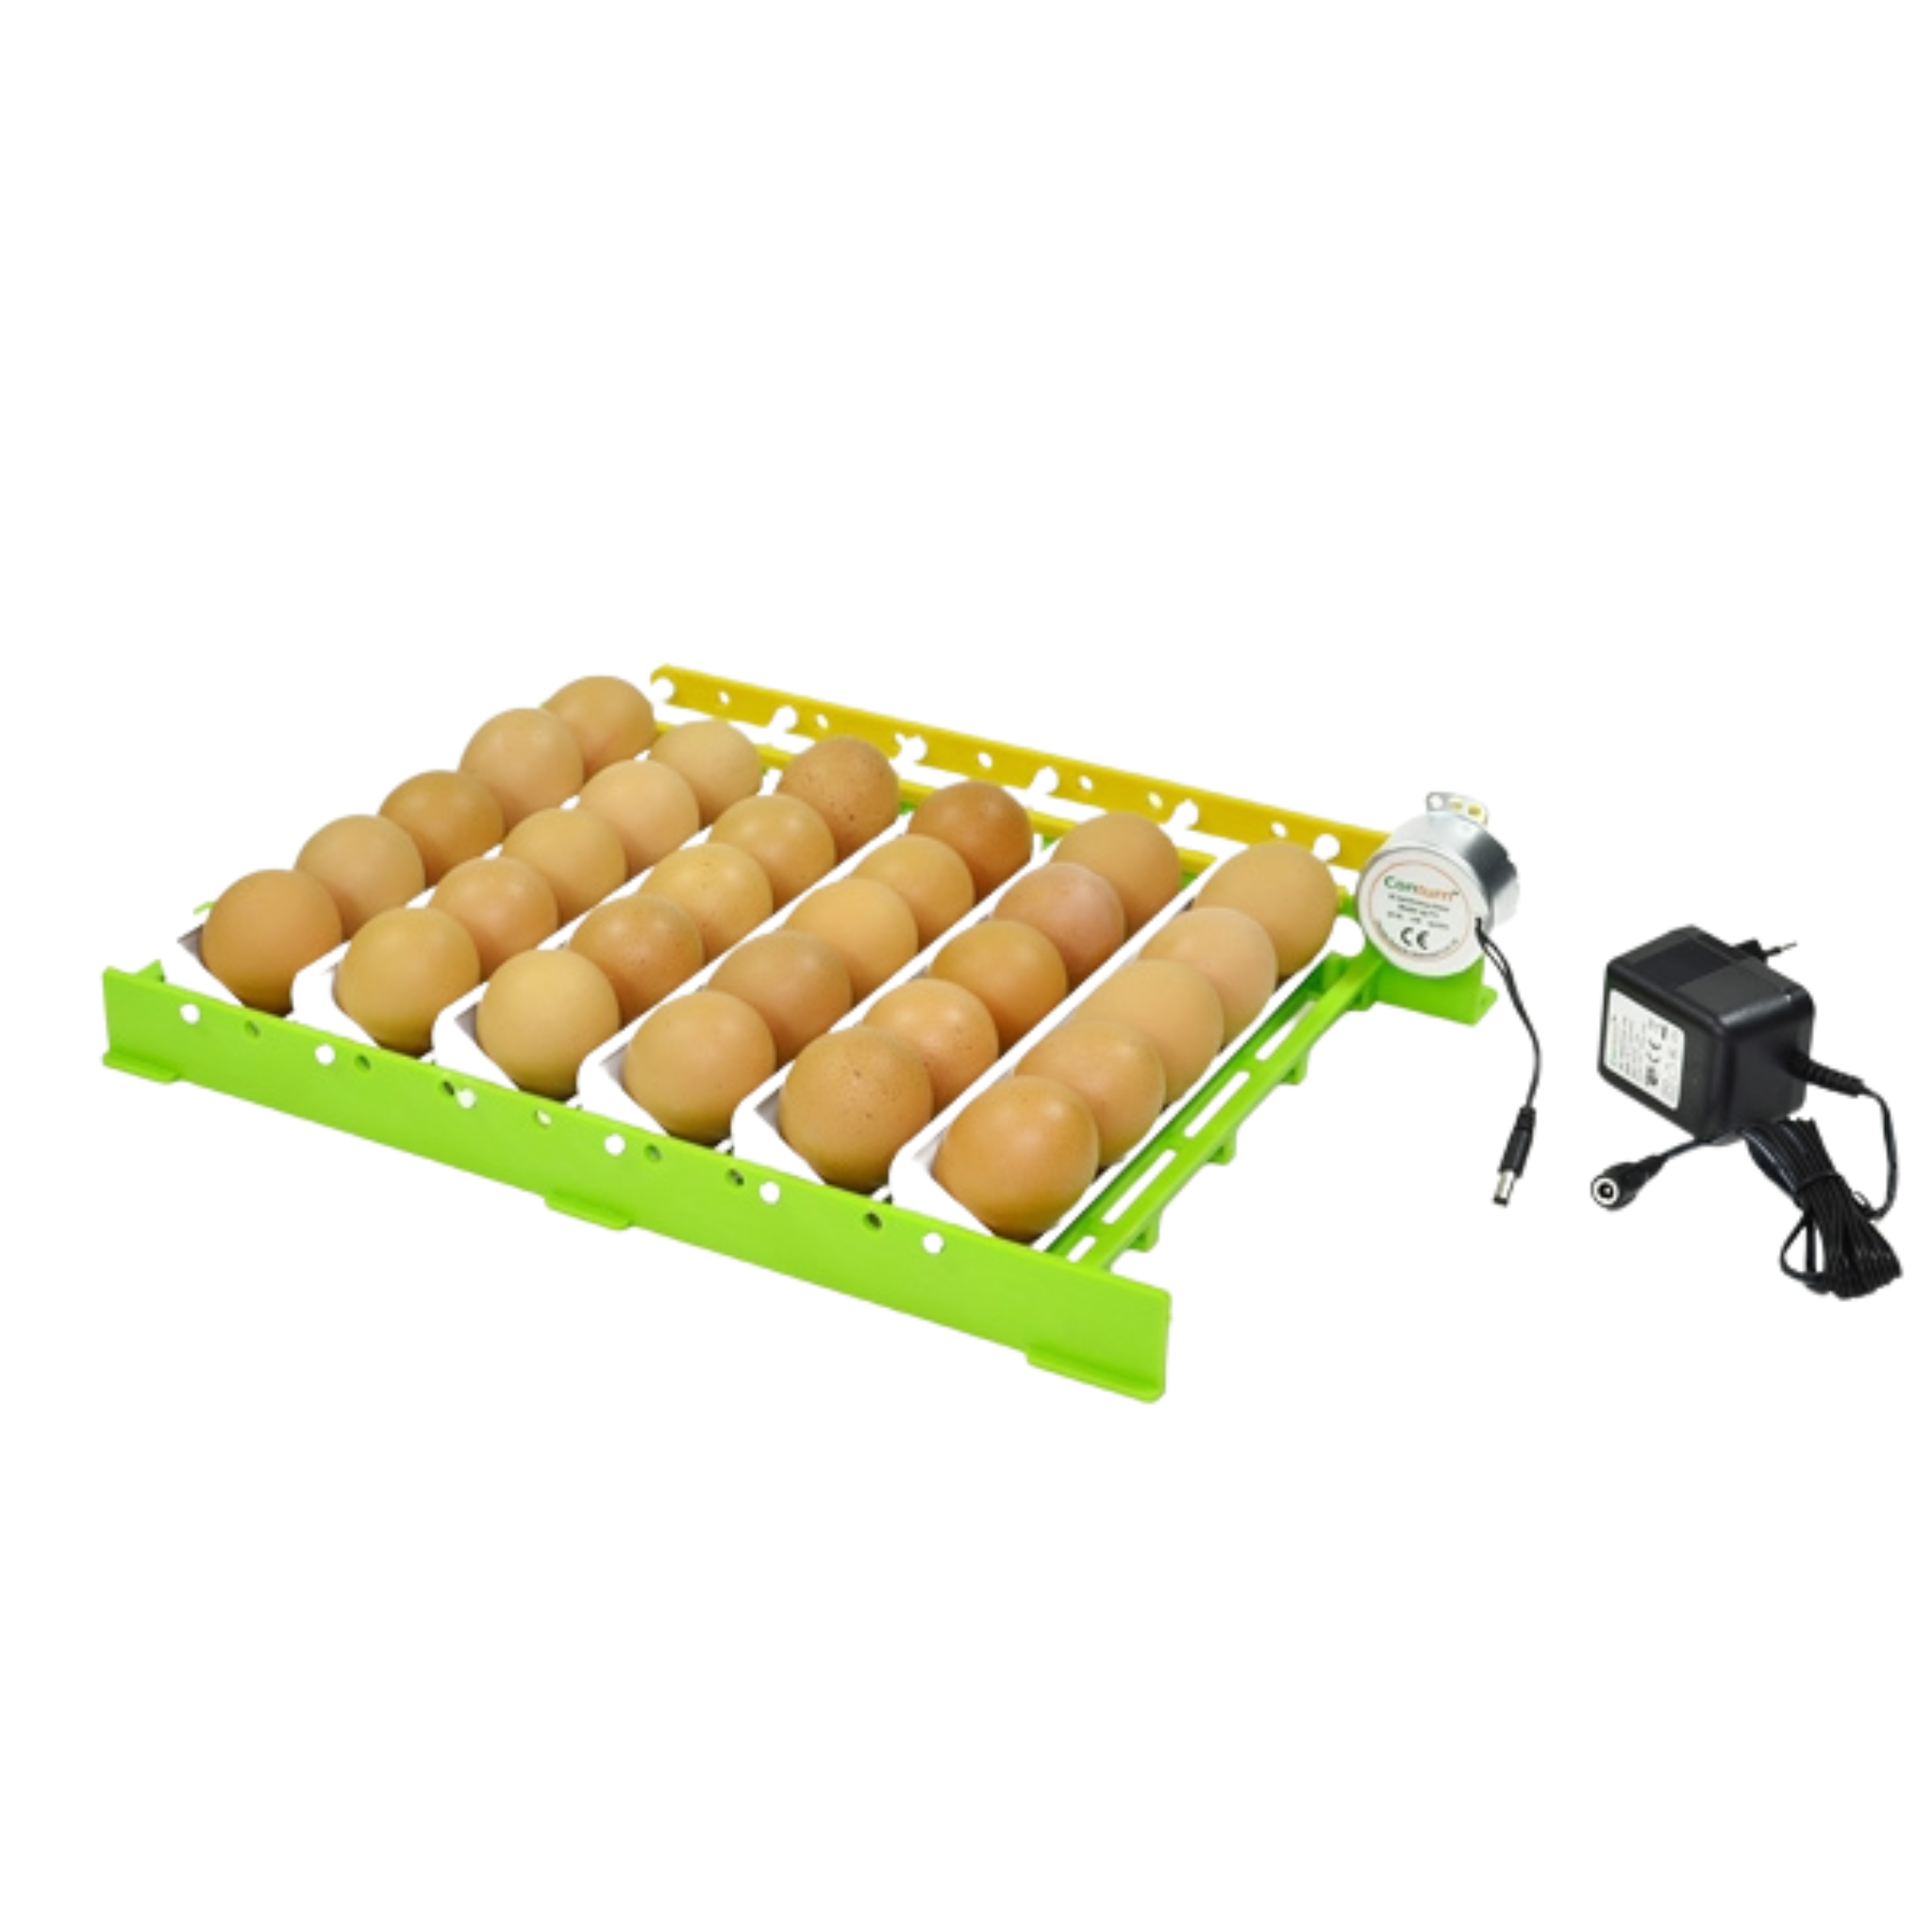 Hatching Time Cimuka. 30 egg turning tray with motor, and power plug visible.